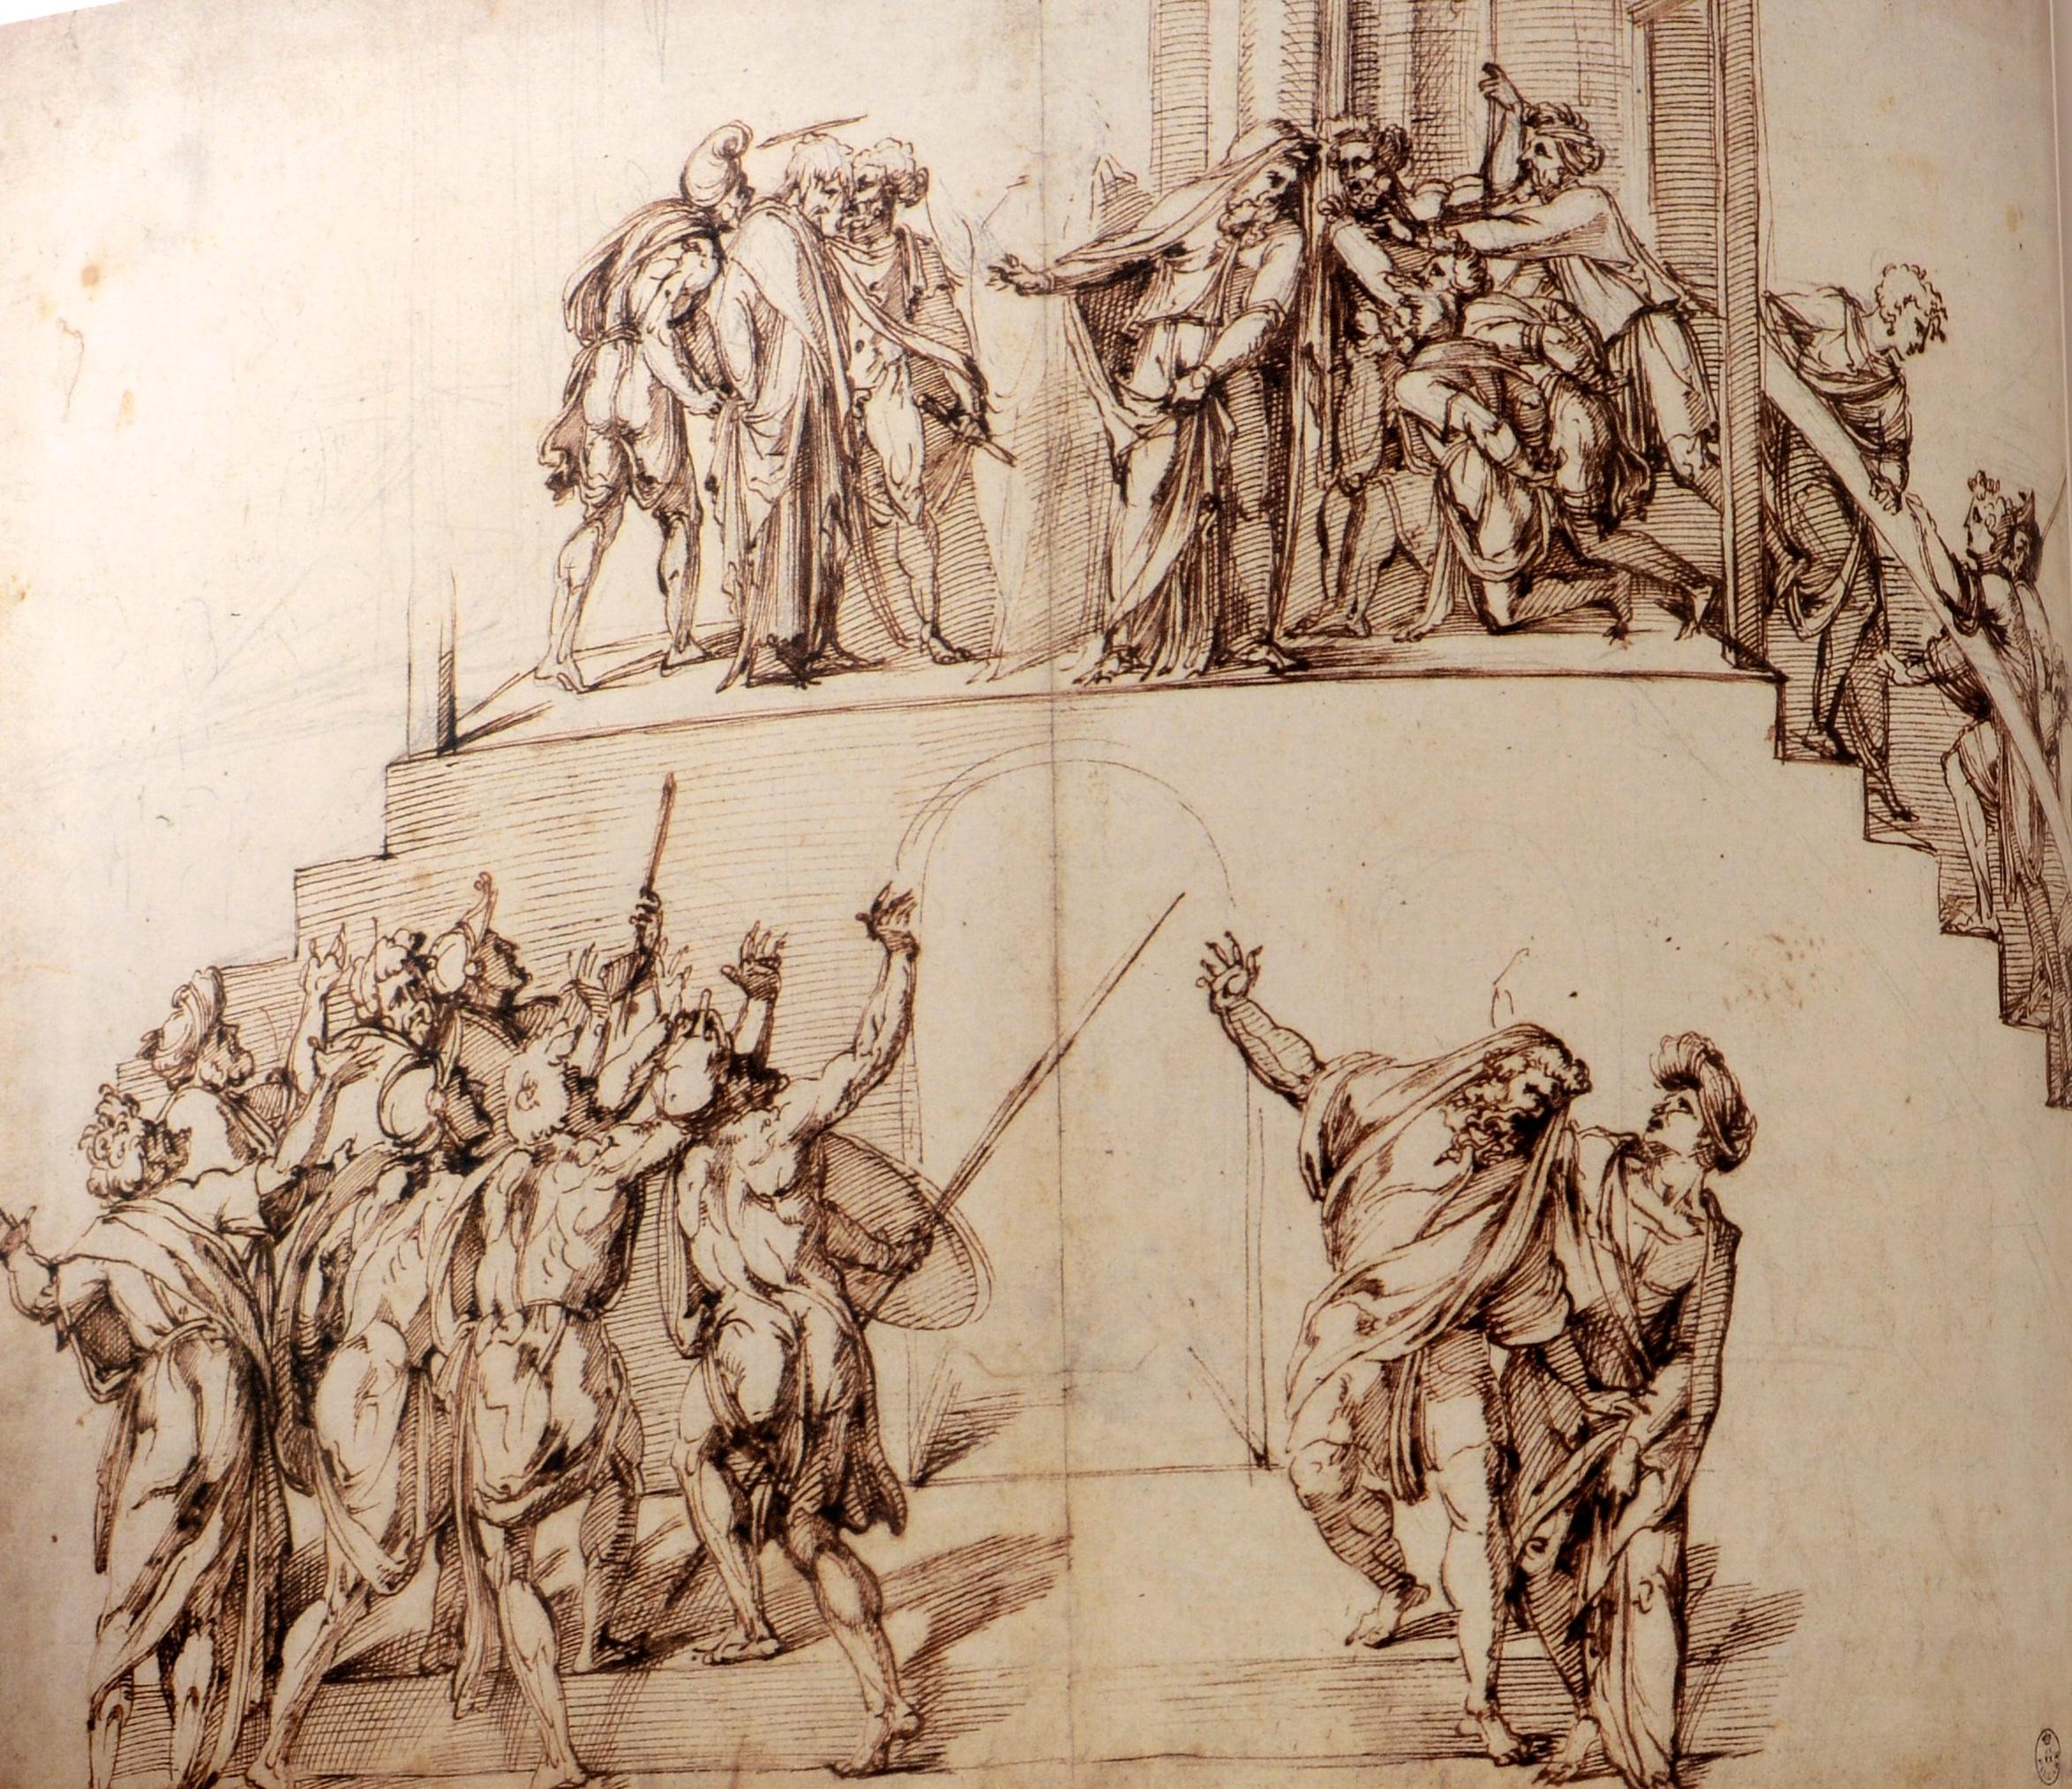 Michelangelo, Vasari, and Their Contemporaries: Drawings from the Uffizi, 1st Ed 12